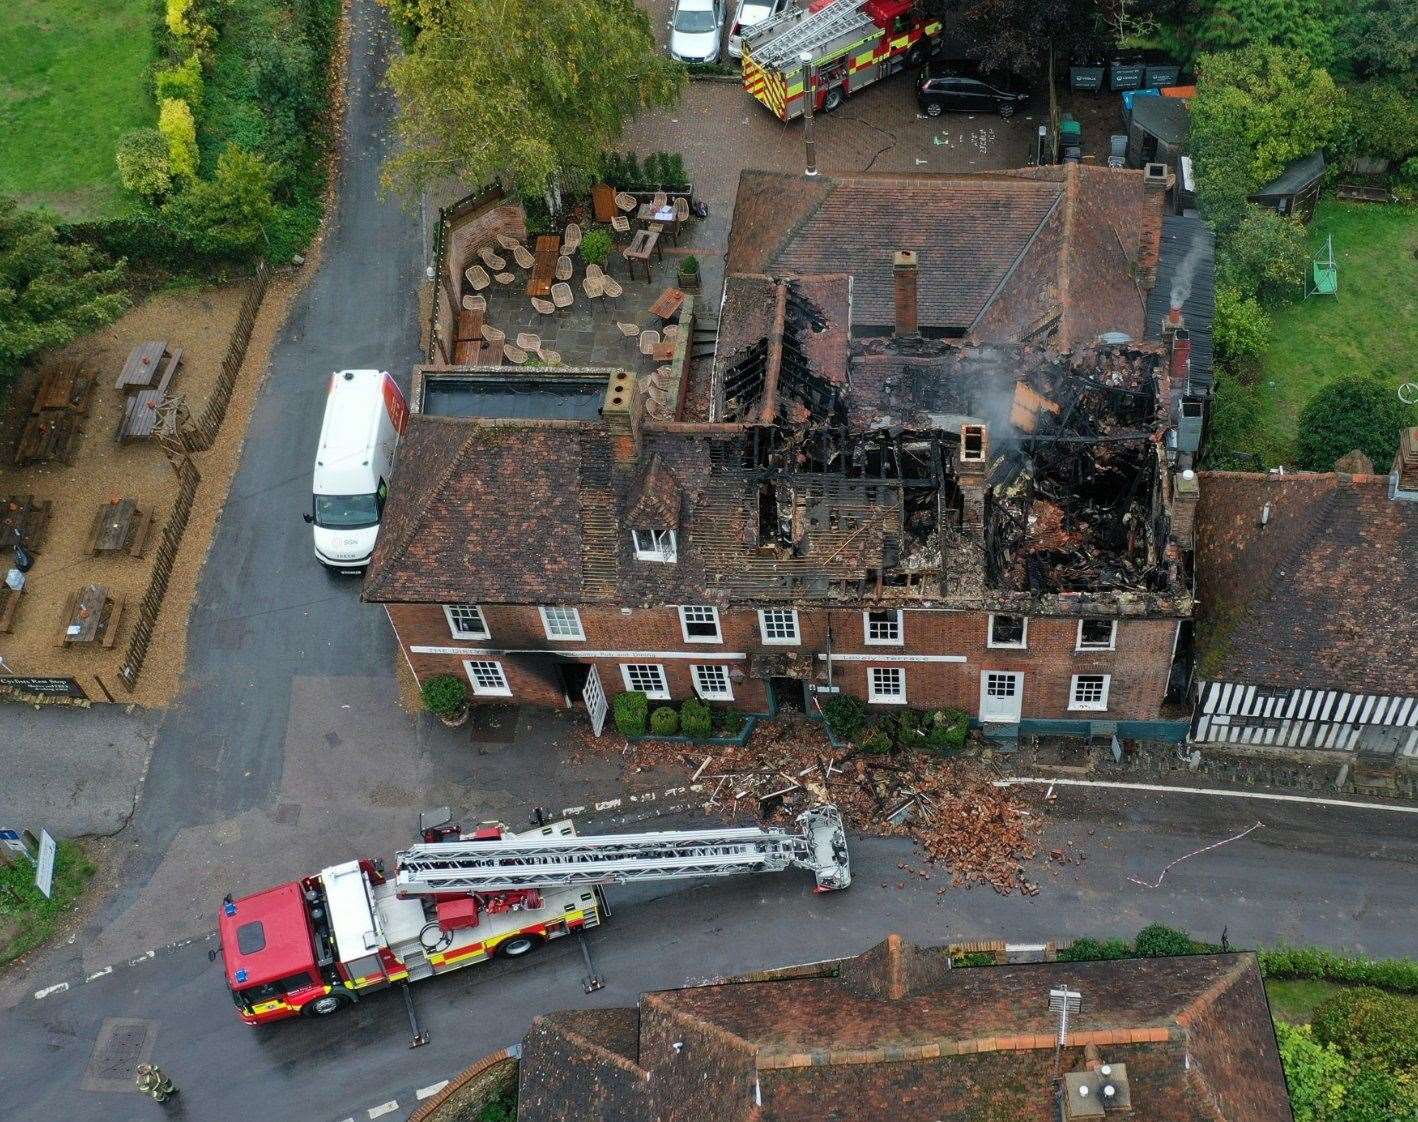 Live-in staff had personal items destroyed in the devastating blaze at The Dirty Habit in Hollingbourne. Picture: UKNip